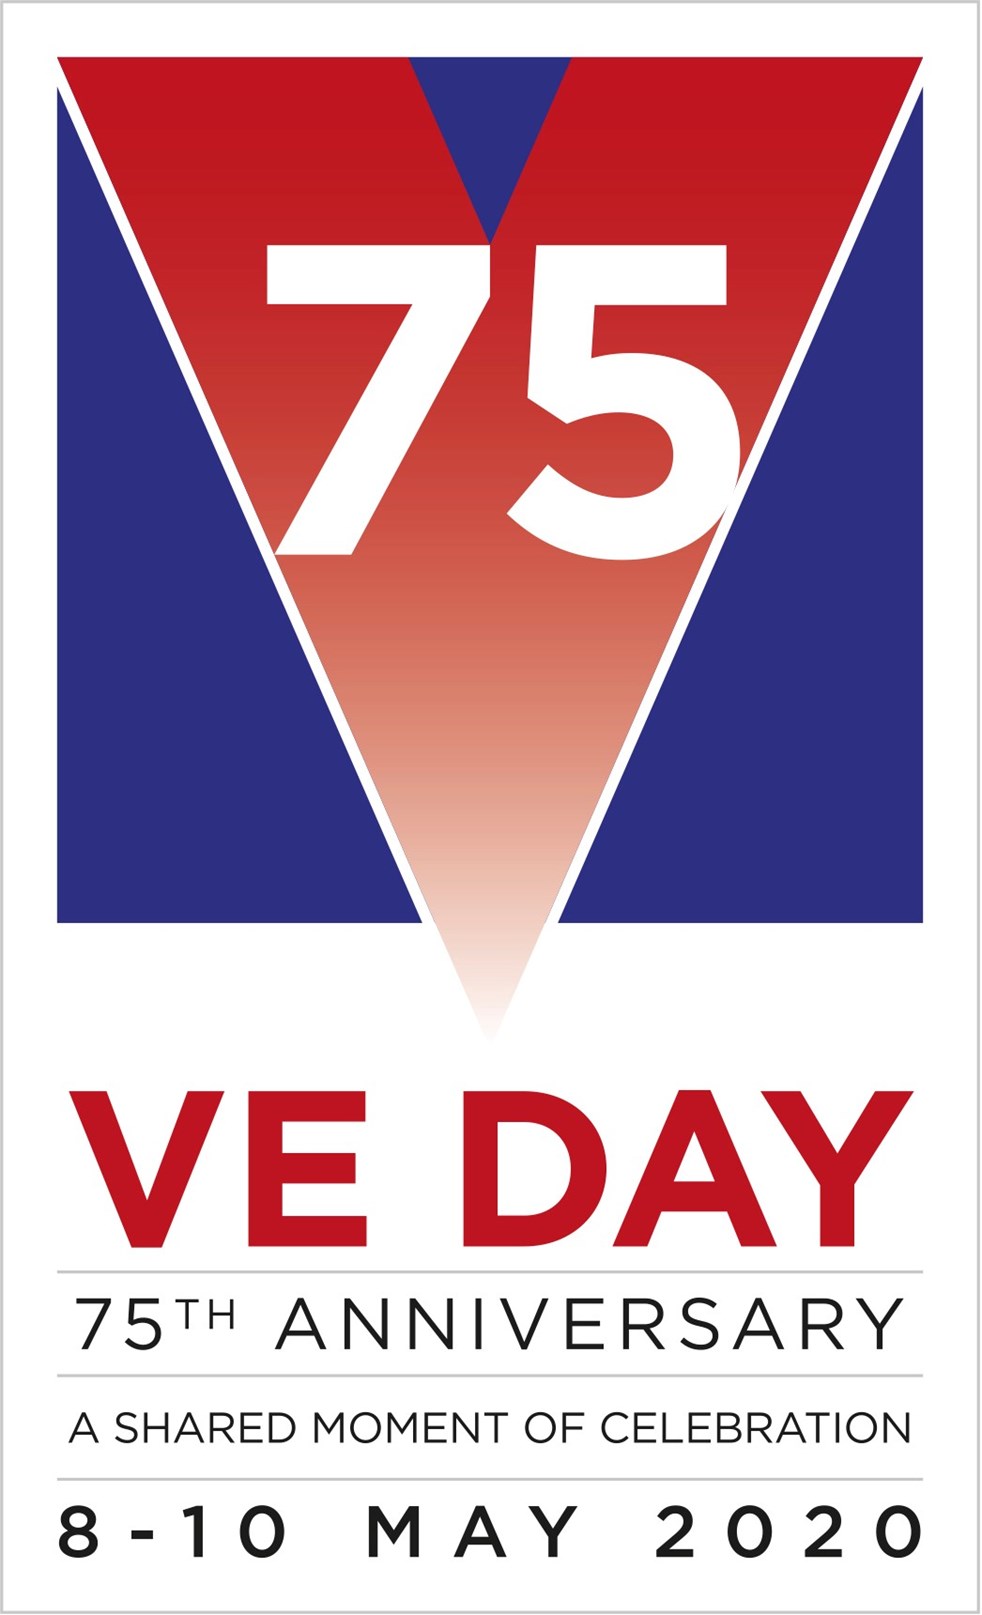 ***Revised version***Celebrating VE Day 75 from home